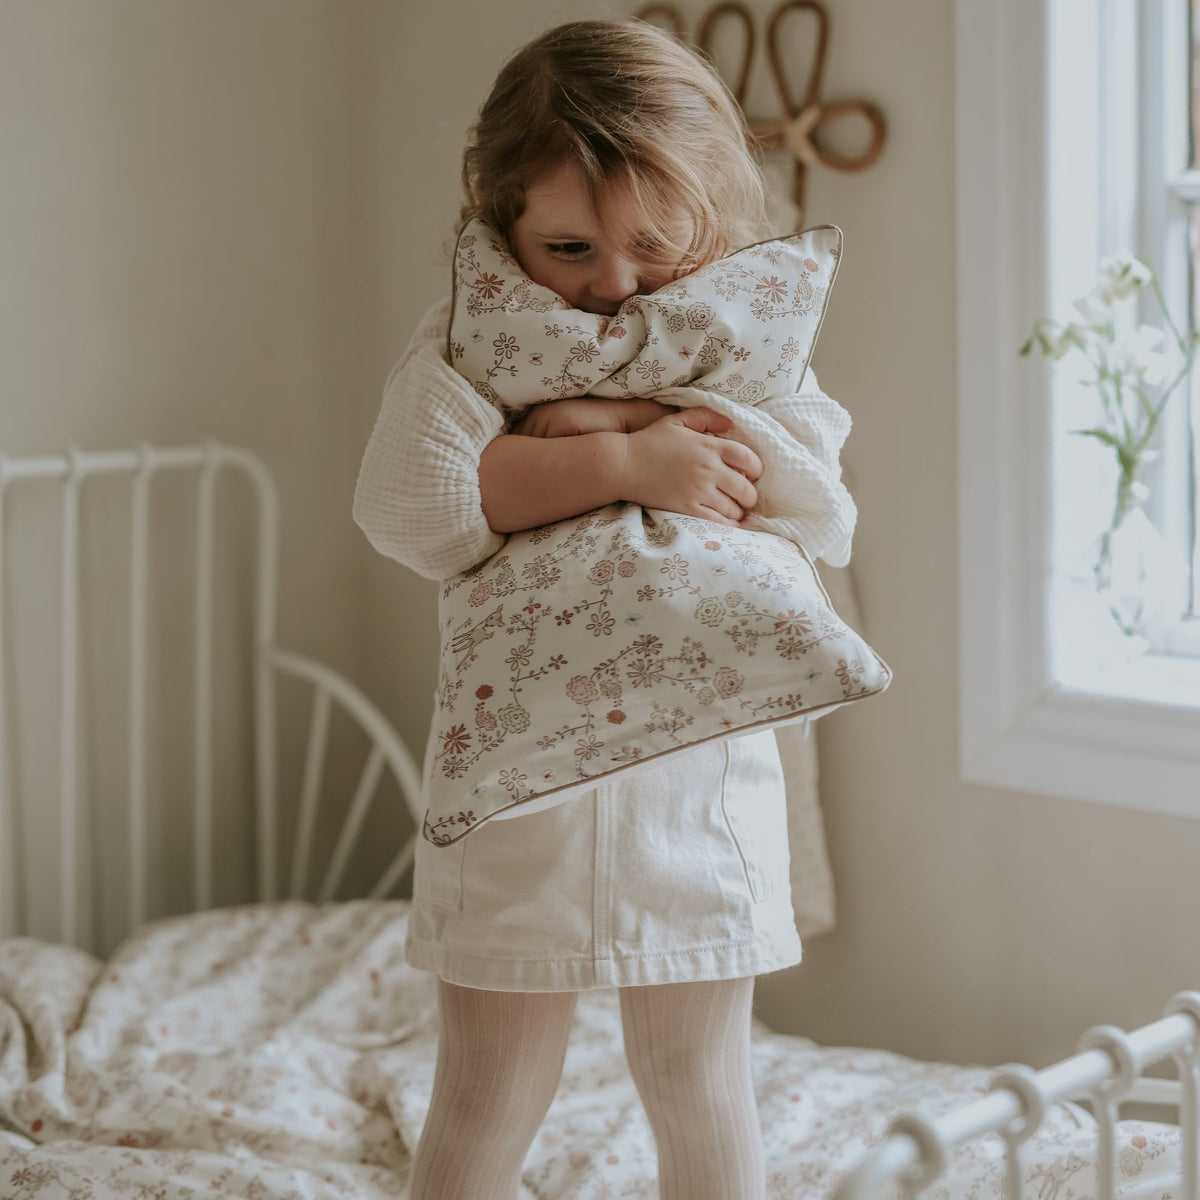 Toddler hugging a gooselings toddler pillow in the print "Into The Woodlands" in color ivory